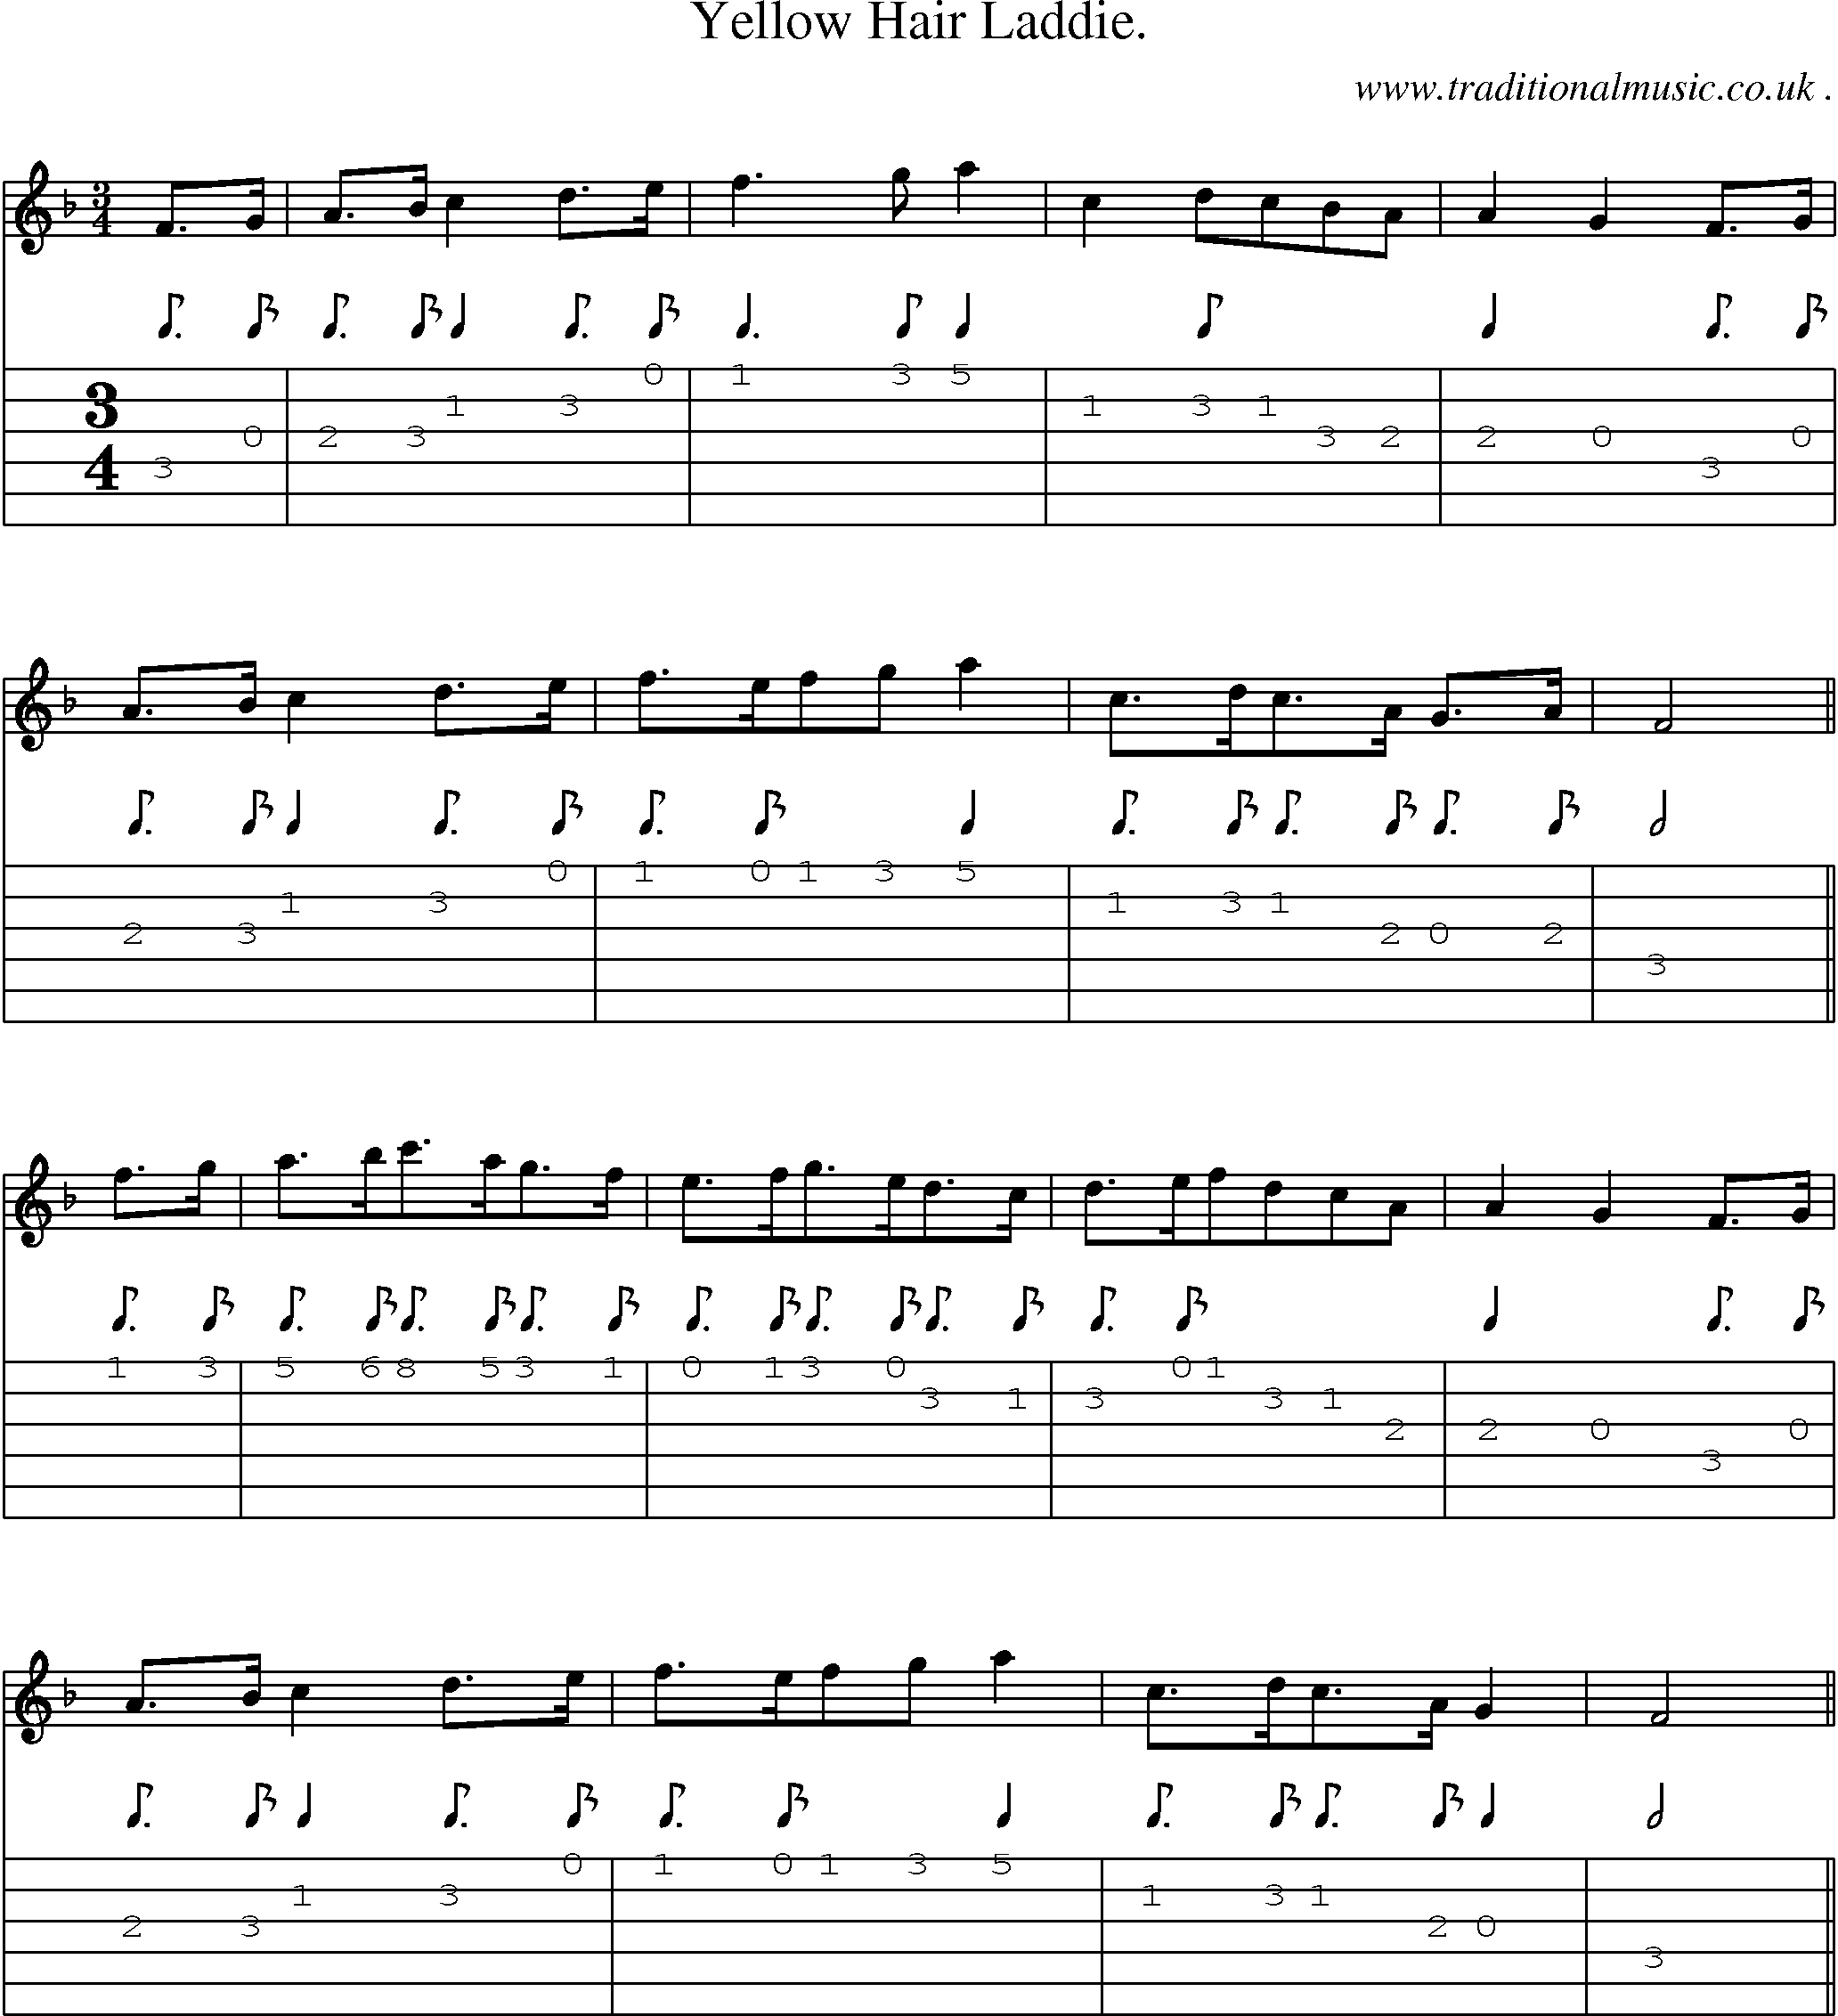 Sheet-Music and Guitar Tabs for Yellow Hair Laddie